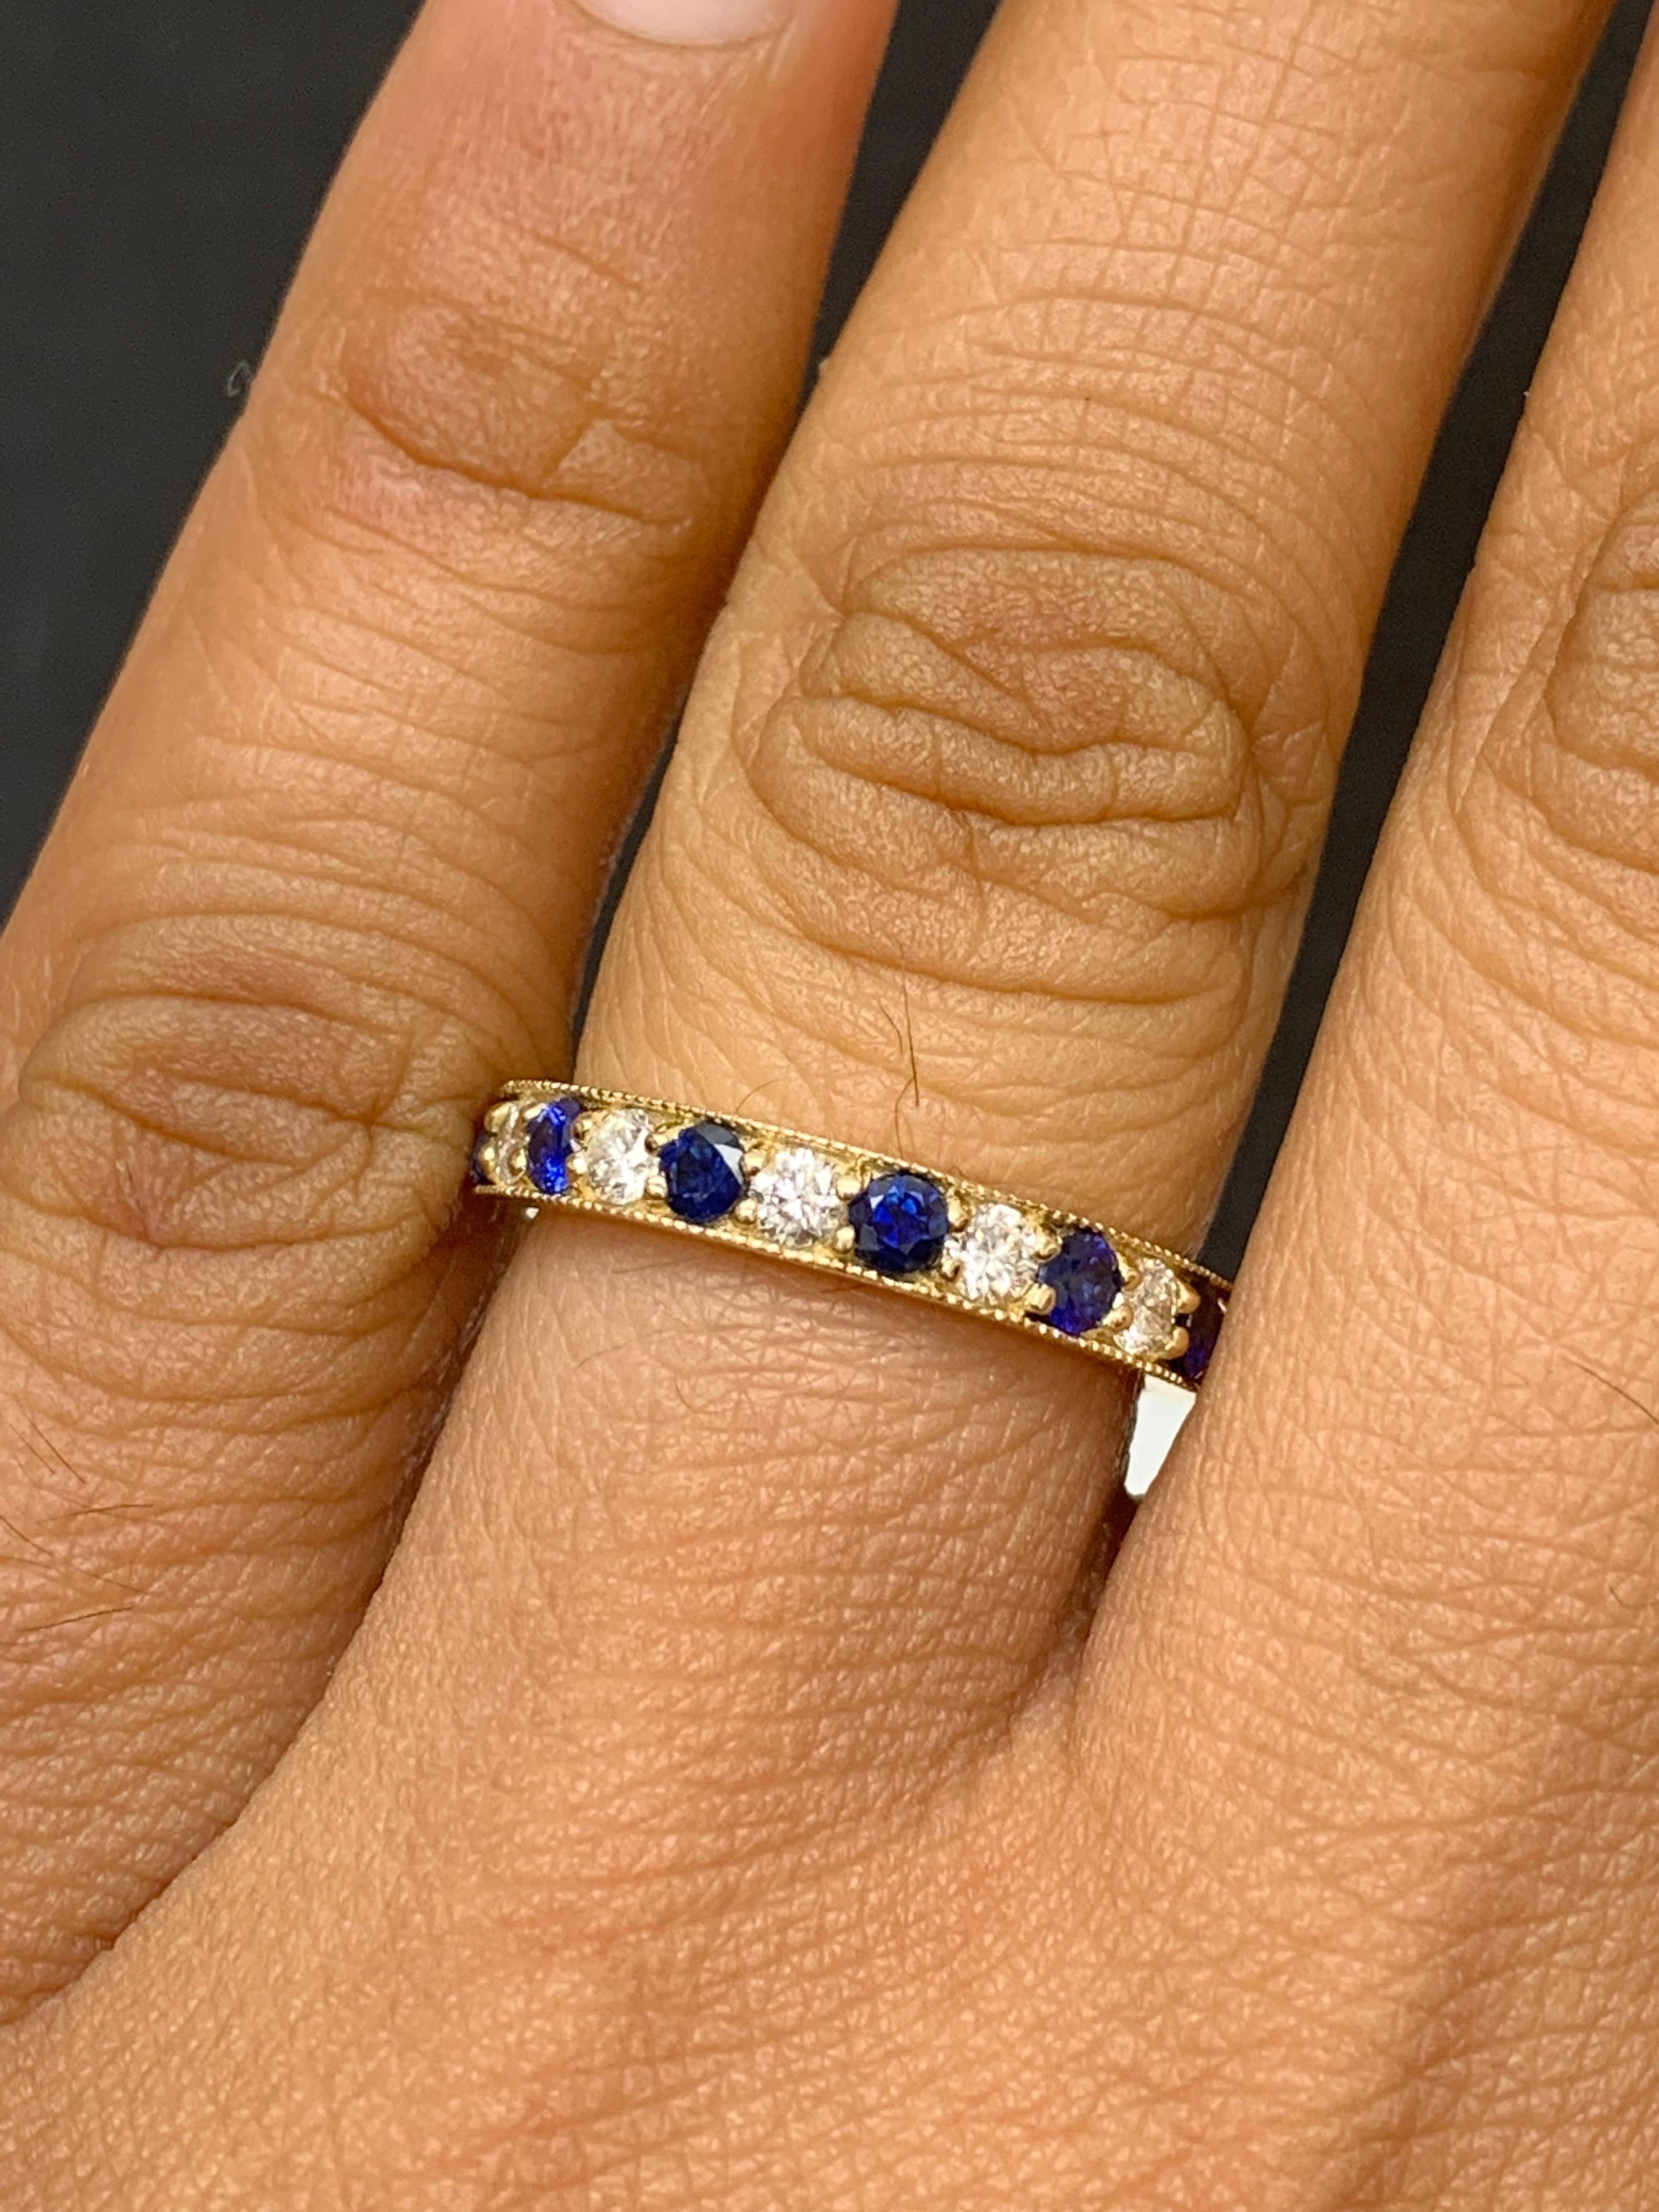 Handcrafted to perfection; showcasing color-rich brilliant-cut blue sapphires that elegantly alternate brilliant-cut diamonds in a 14k yellow gold setting. 
The 7 Blue Sapphires weigh 0.65 carats total and 6 diamonds weigh 0.30 carats total.

Size